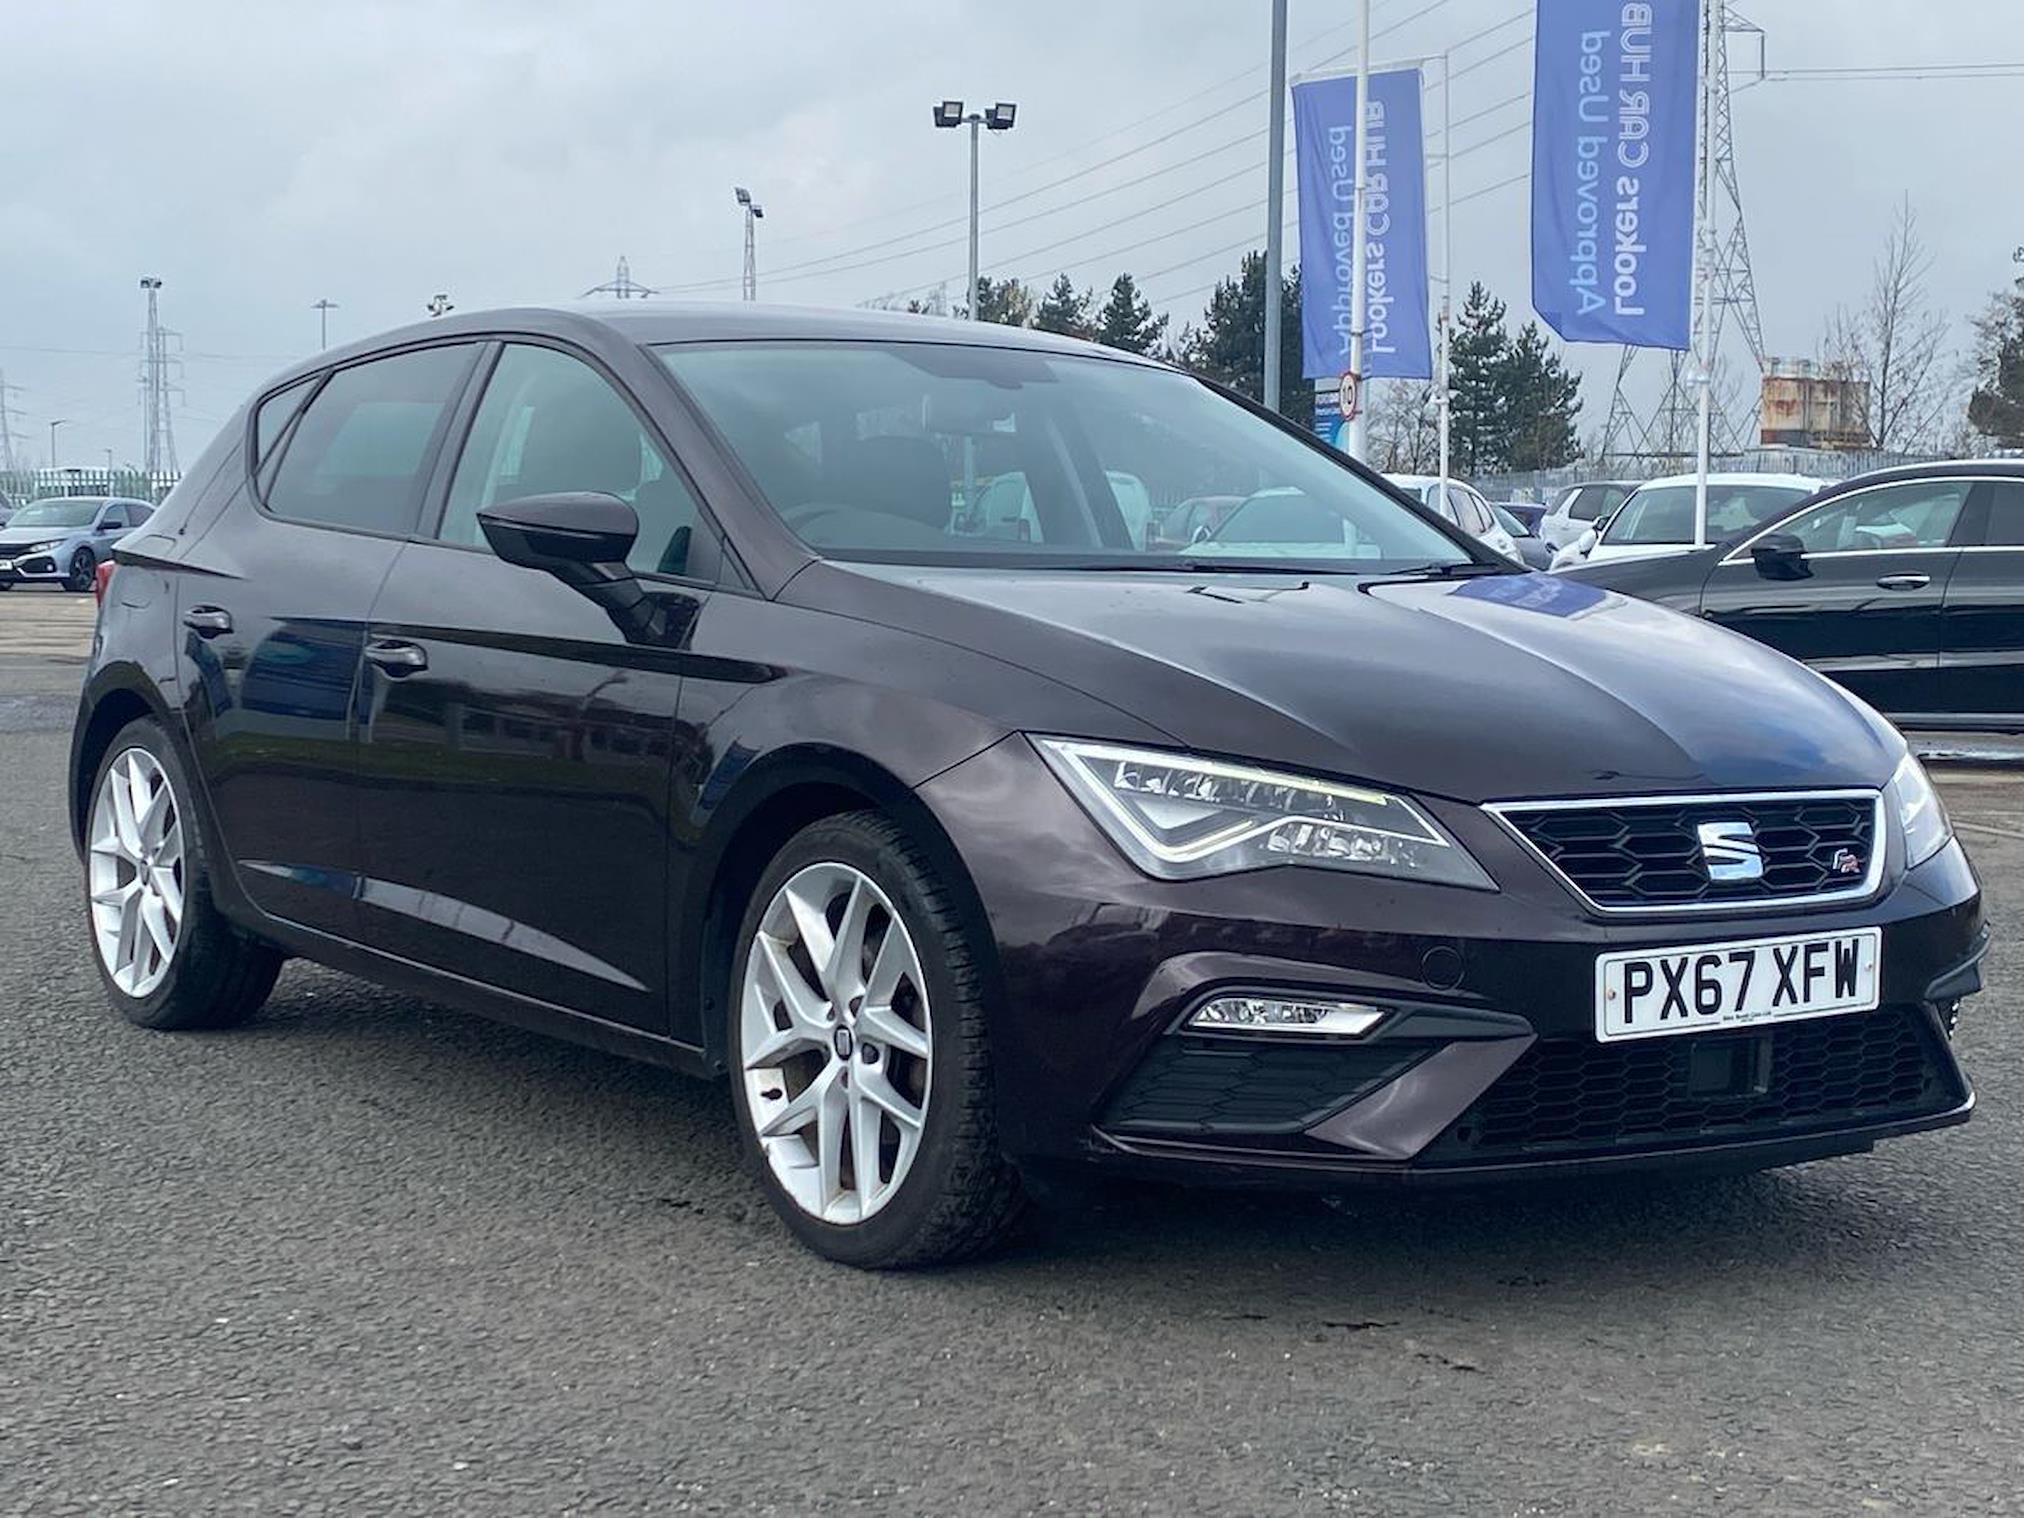 Used SEAT LEON 1.4 Tsi 125 Fr Technology 5Dr 2017